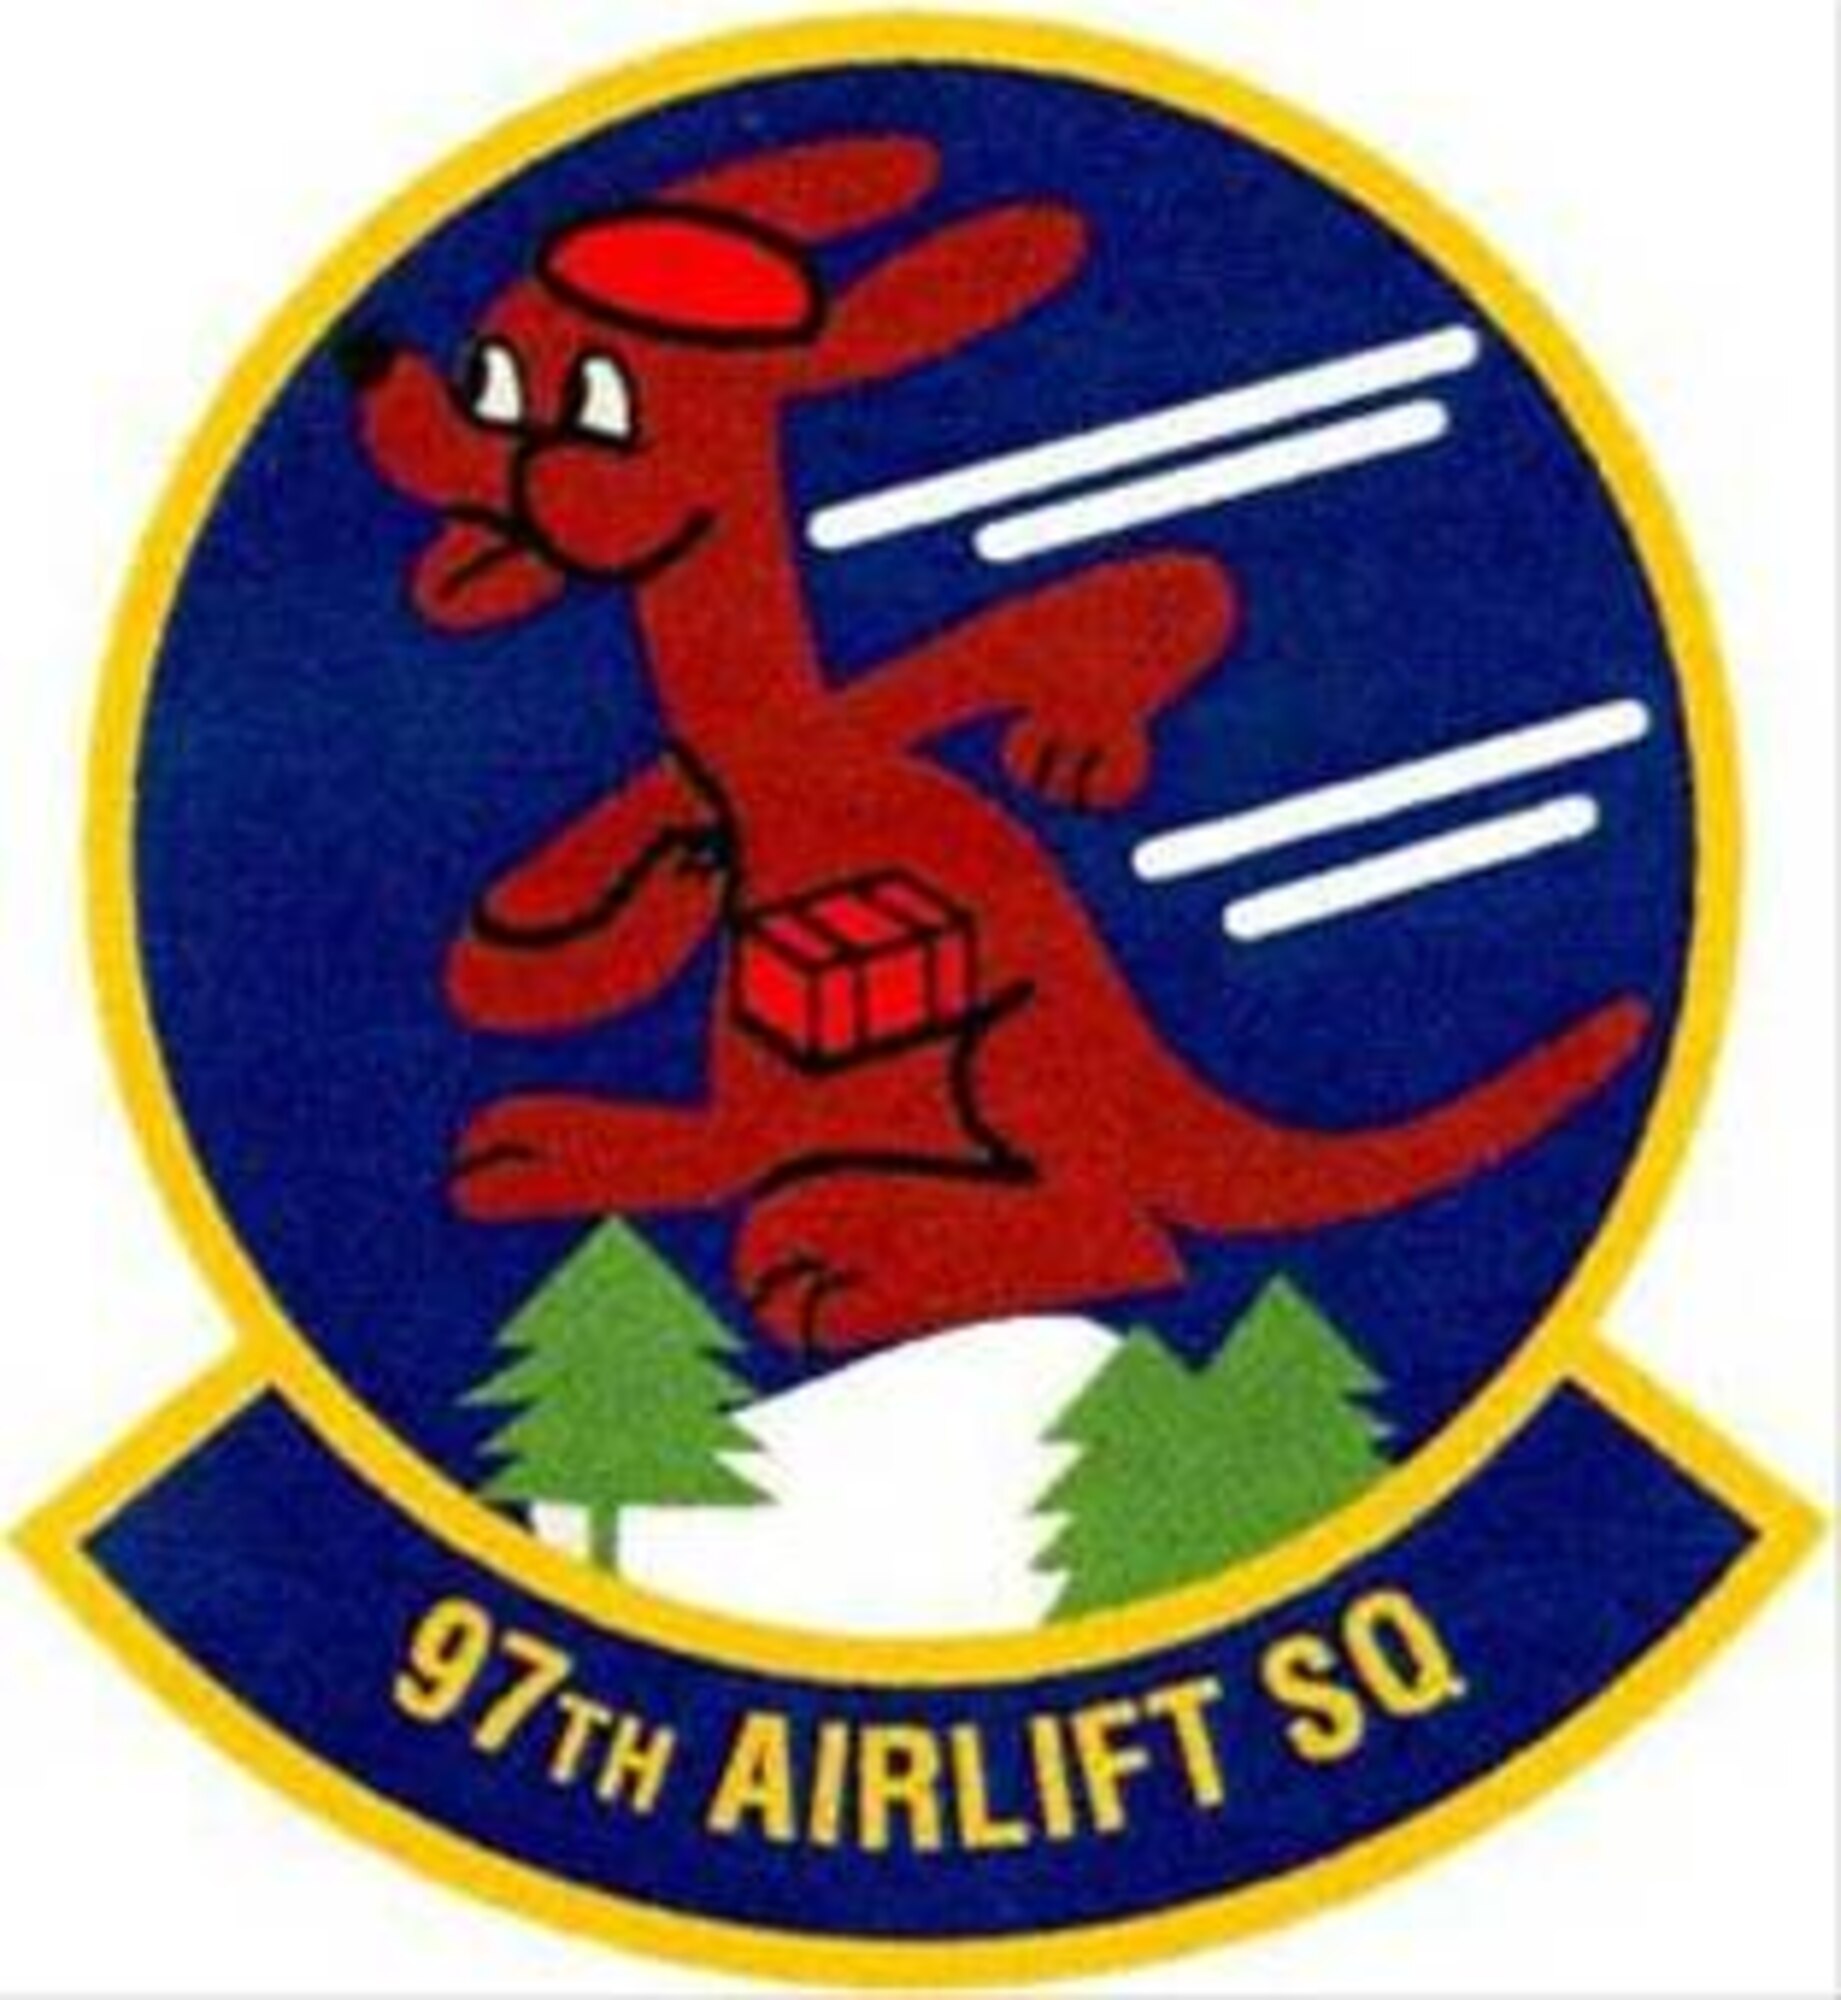 97th Airlift Squadron, McChord AFB, Wash.